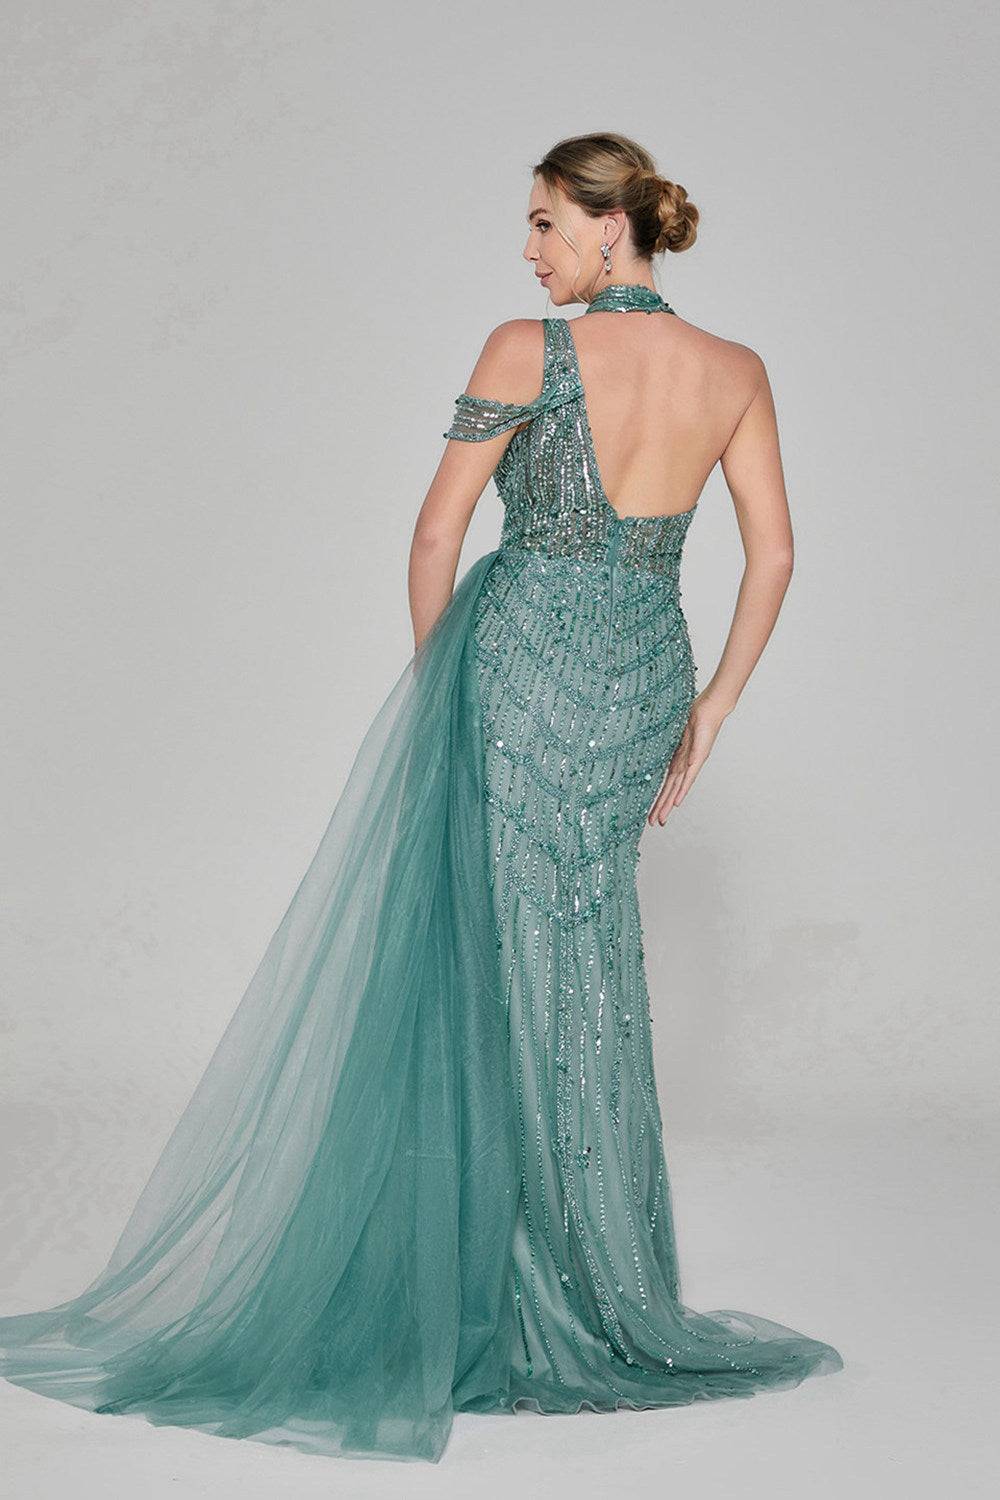 Unique One-Shoulder Heavy Beaded Evening Gown with Dazzling Sparkles MC118